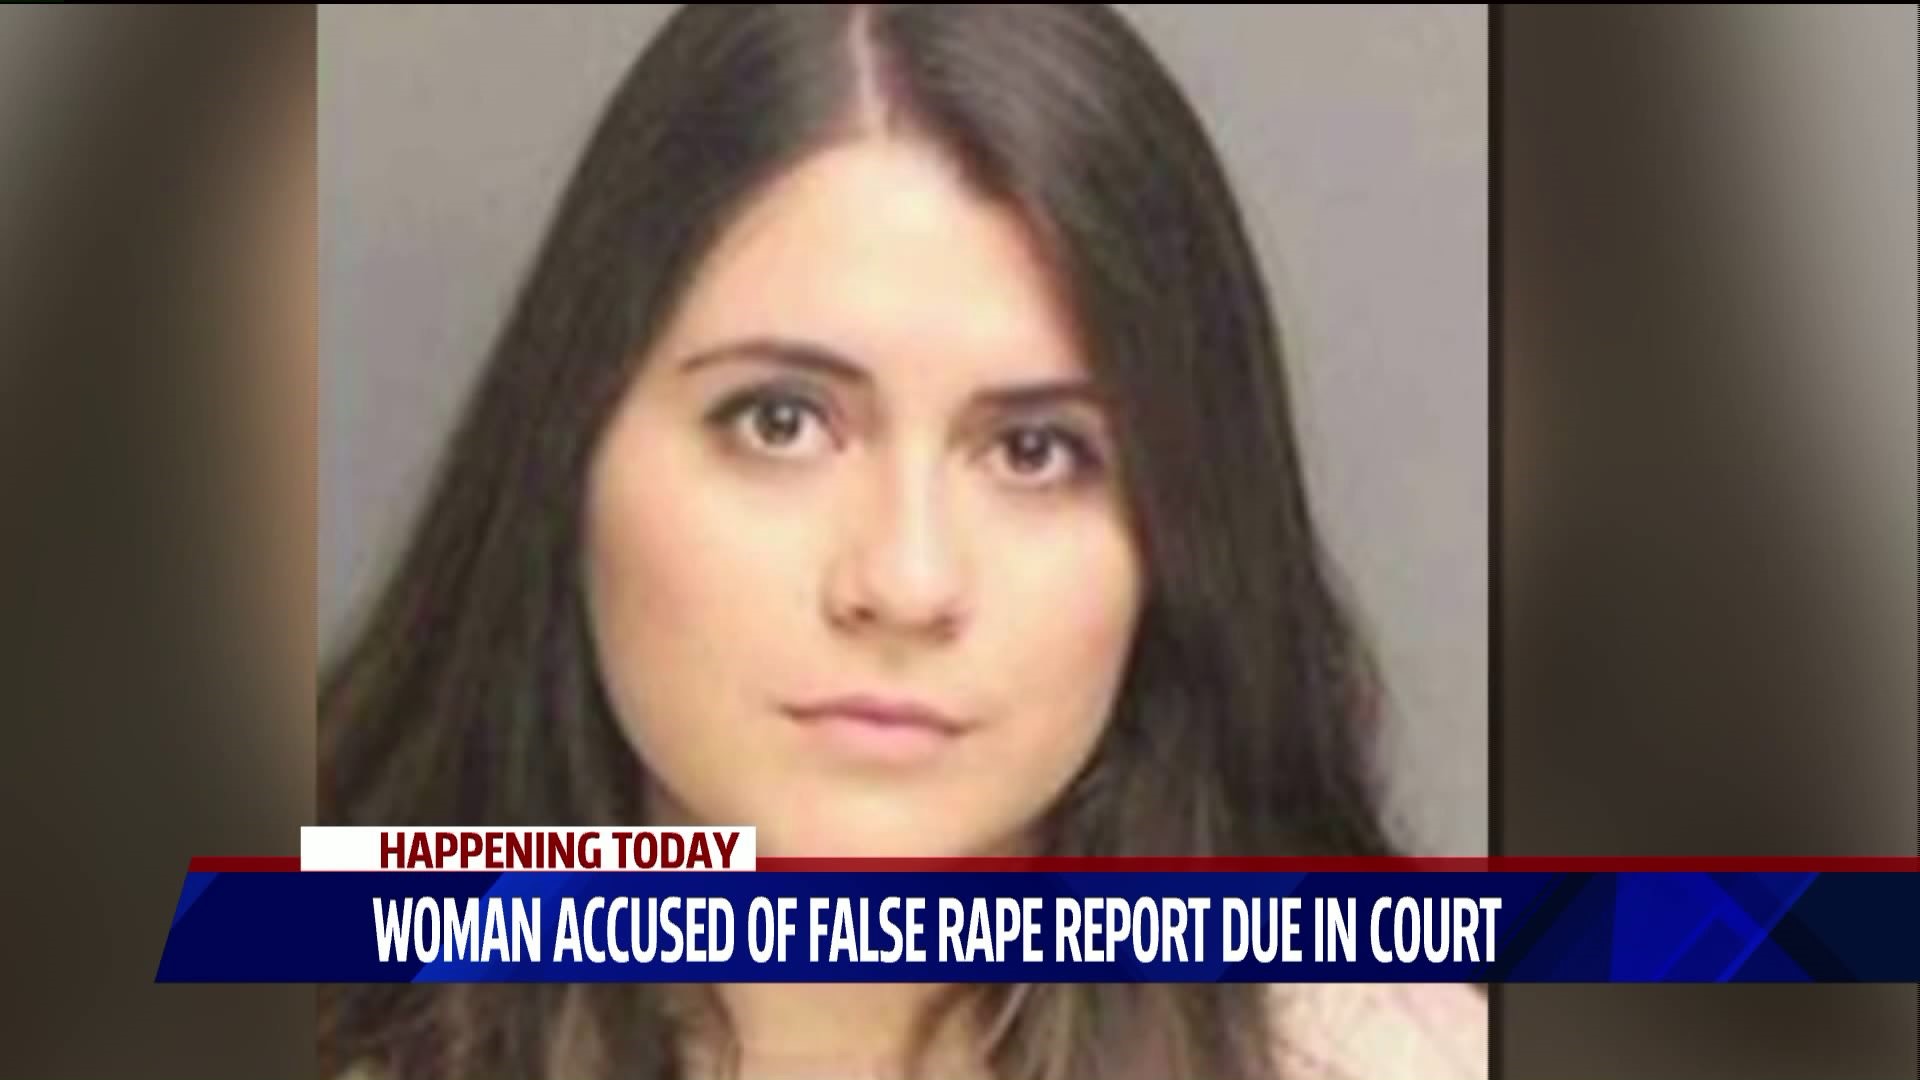 Woman accused of lying about rape to appear in Bridgeport courtroom